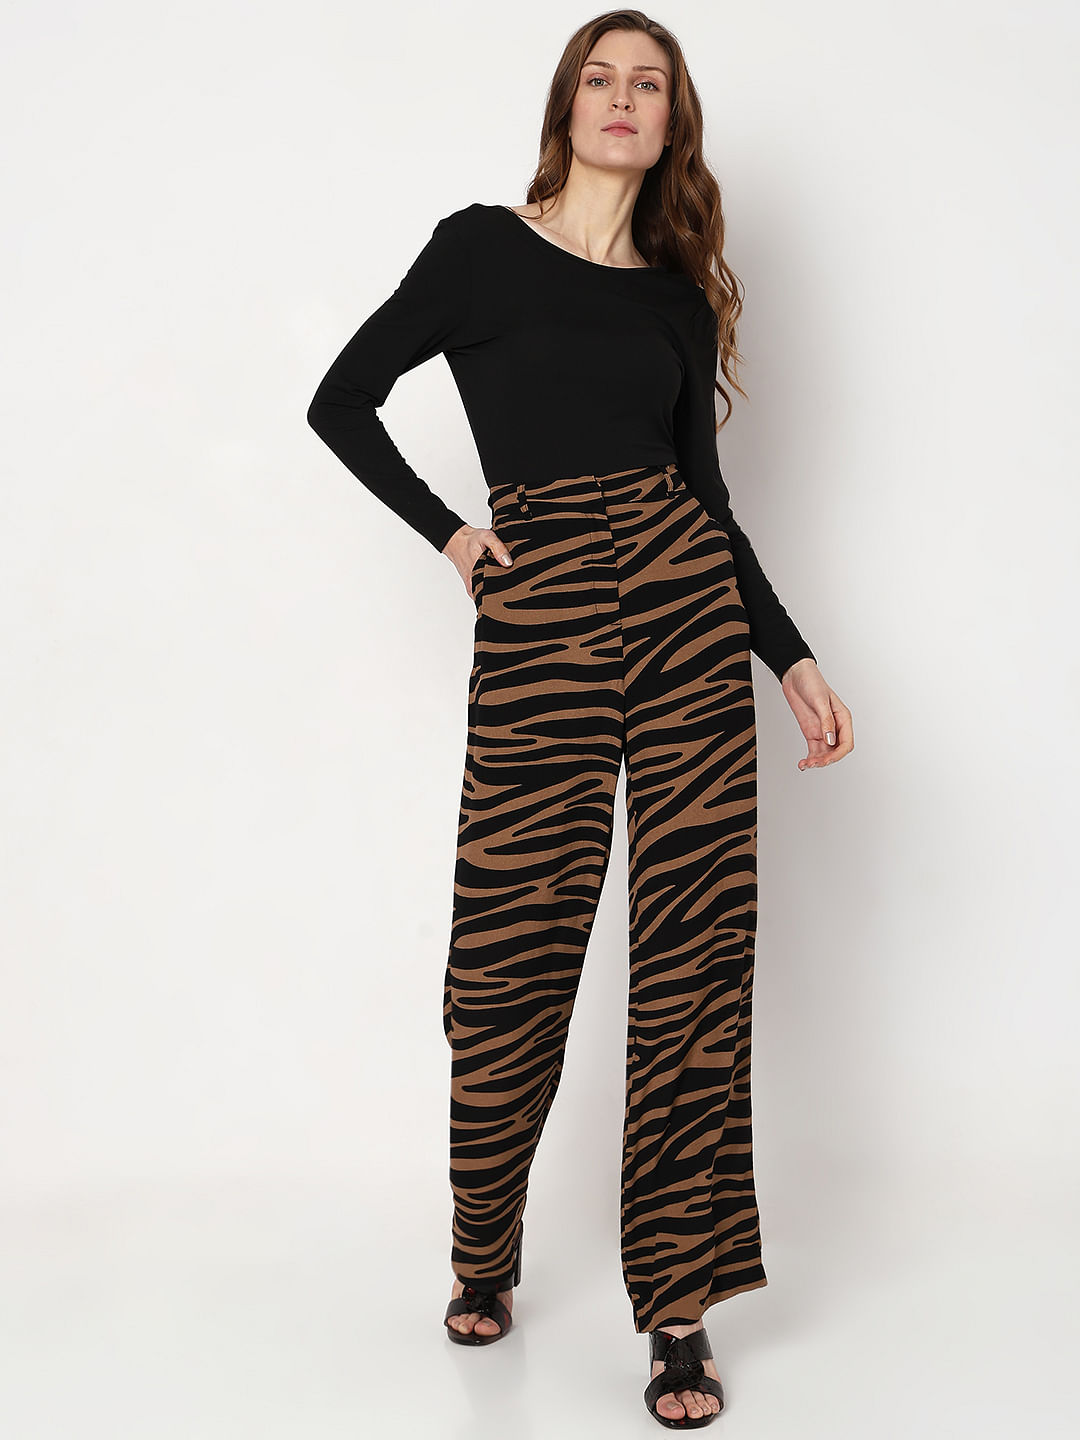 How to Wear Leopard Print Pants for the Office: 5 Cute Outfit Ideas -  Dreaming Loud